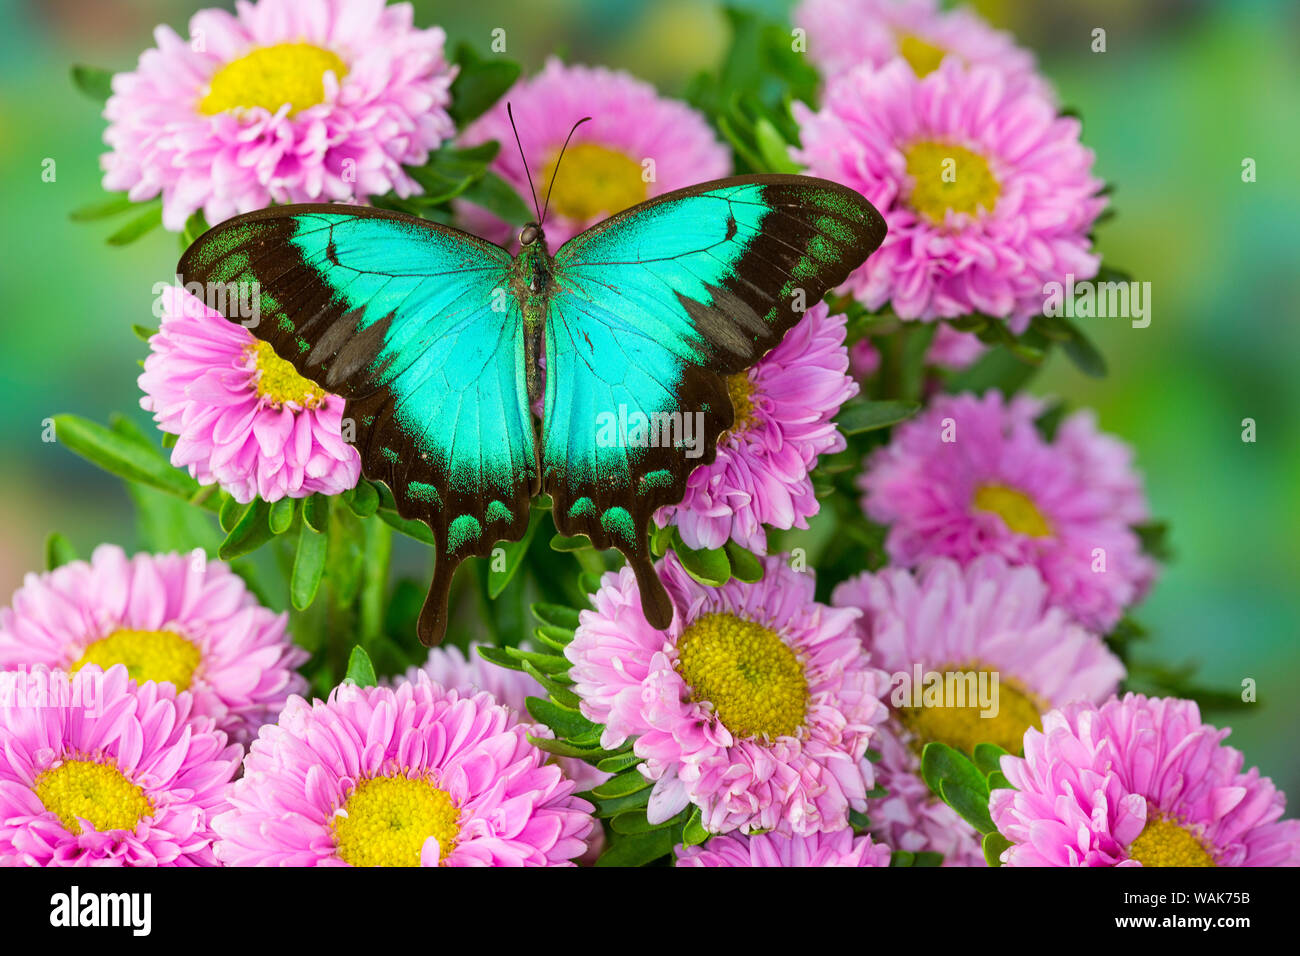 Asian tropical swallowtail butterfly Papilio larquinianus on pink flowering mums Stock Photo